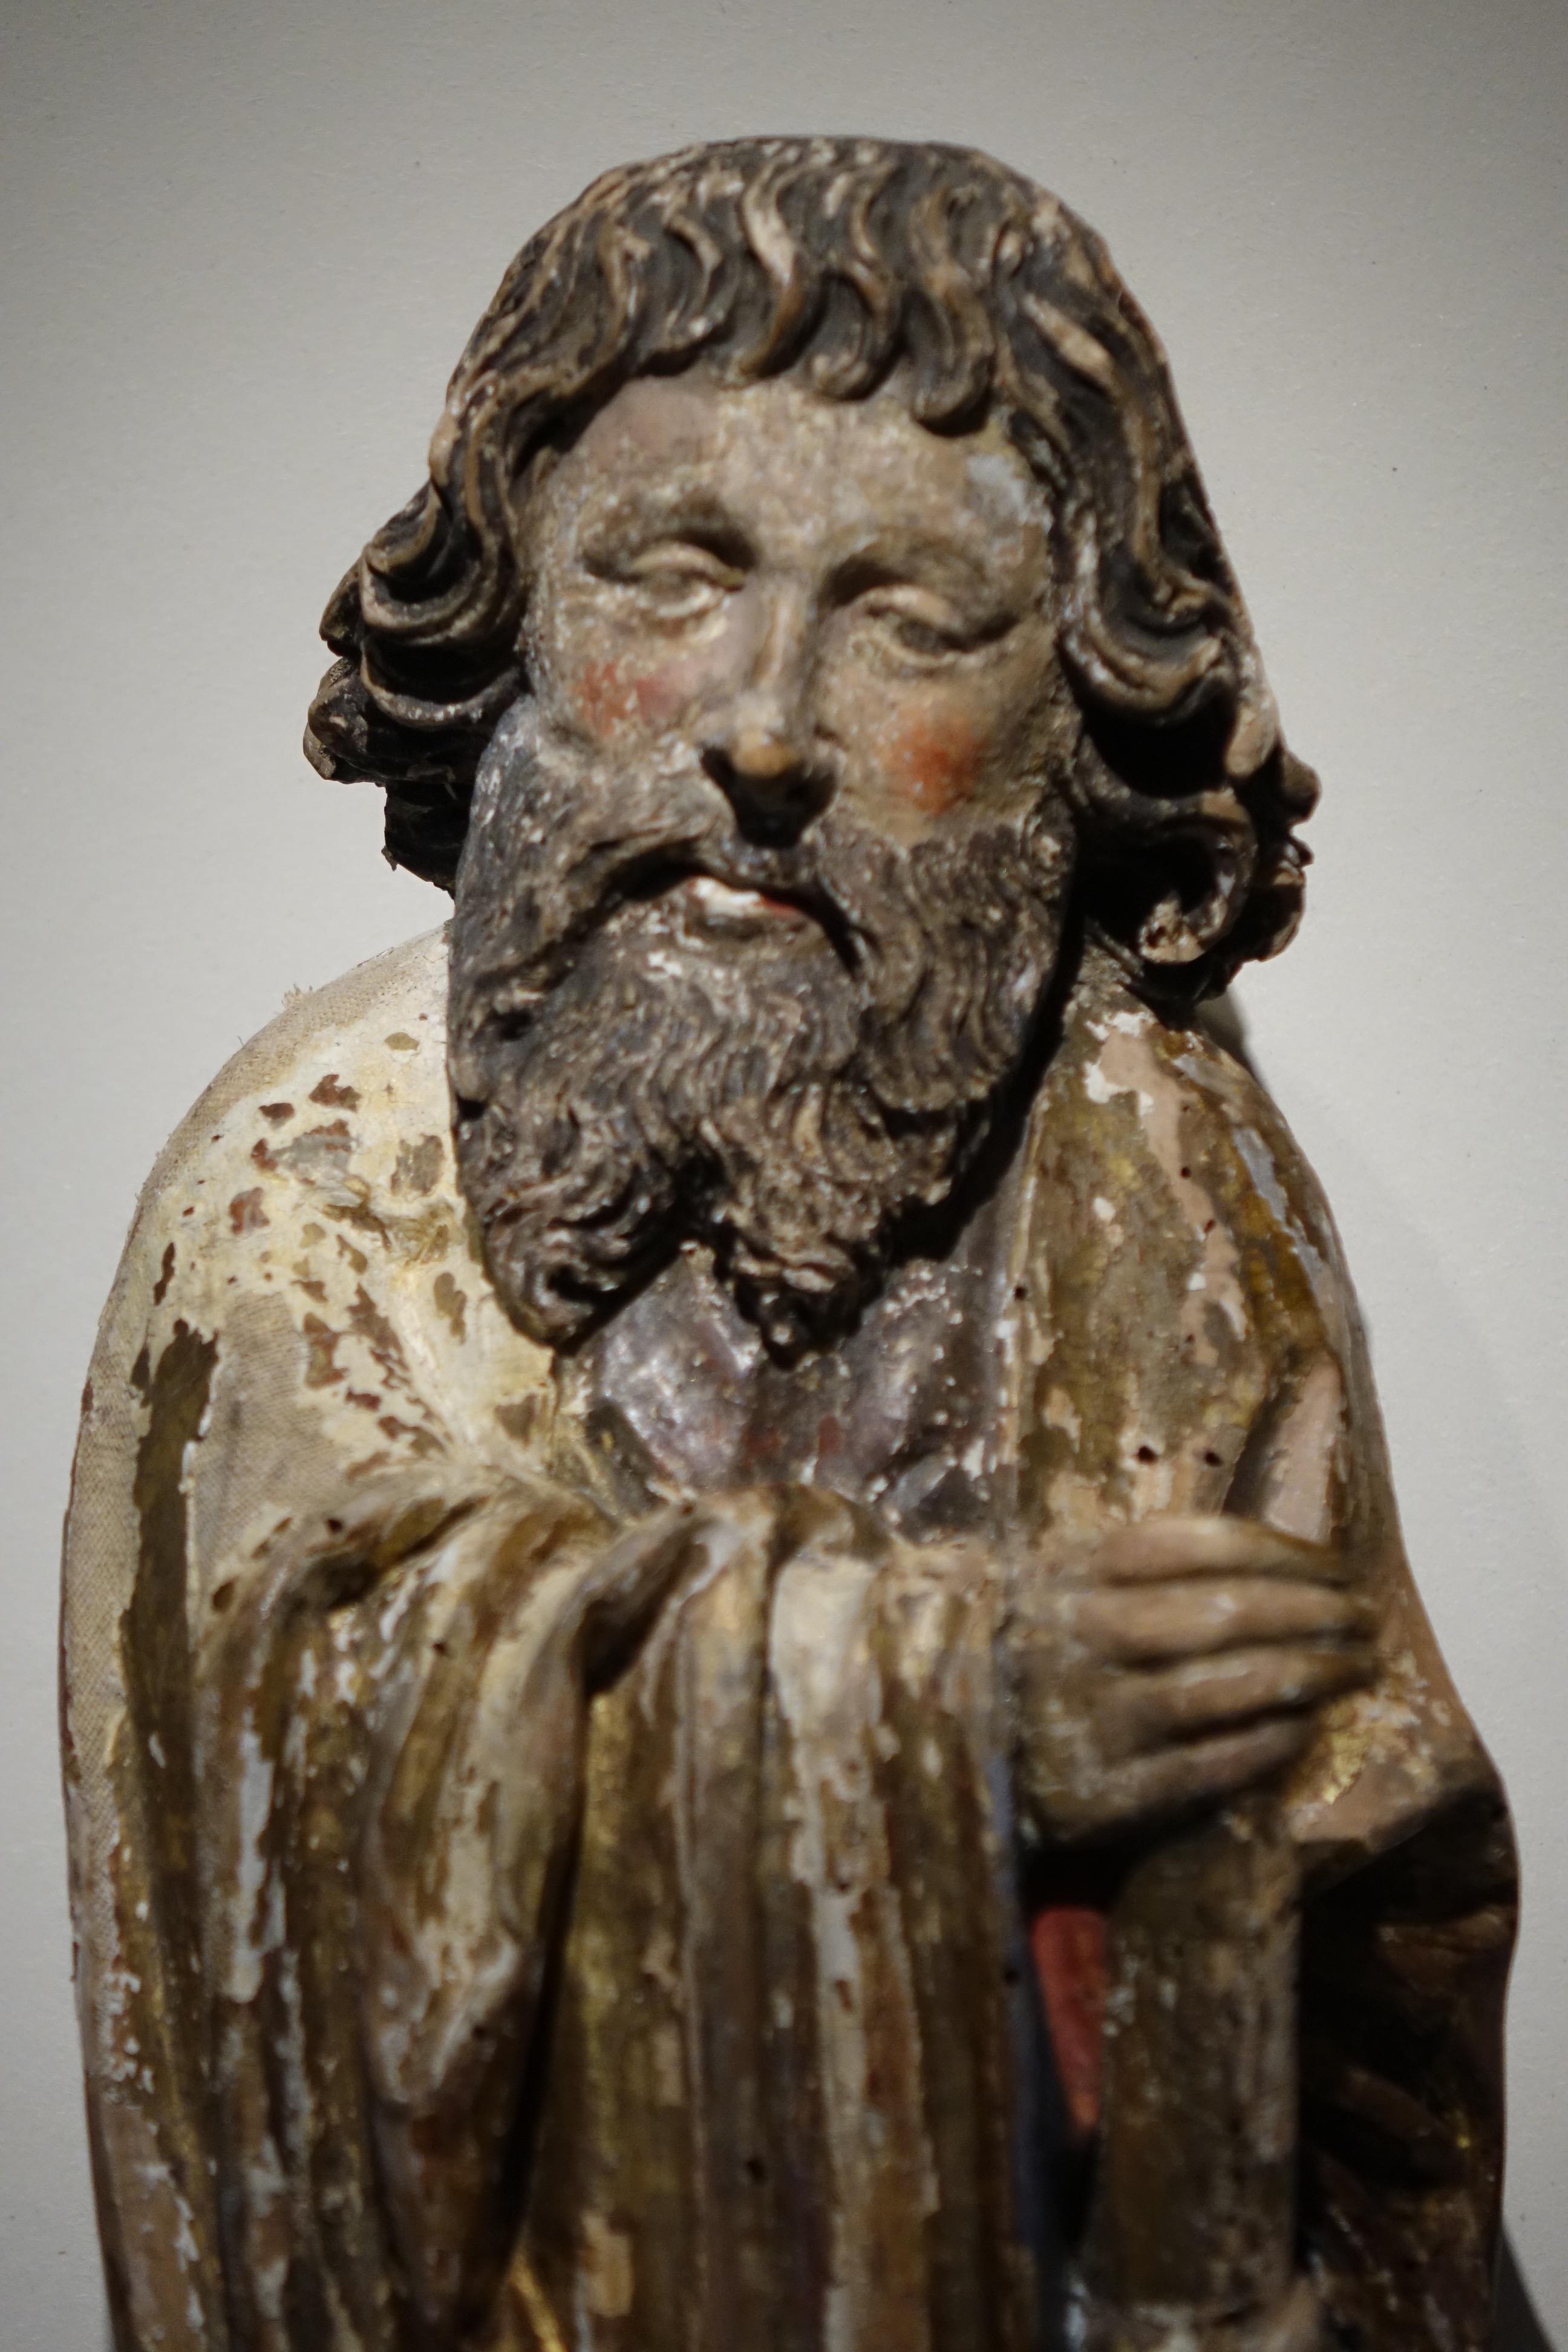 Sculpture of Saint Jacques the Minor, Burgundy, 15th century
Statue representing Saint-James
Saint-James refers to several Christian saints or biblical figures, the most famous being the apostle James of Zebedee, known as James the Major.
We are